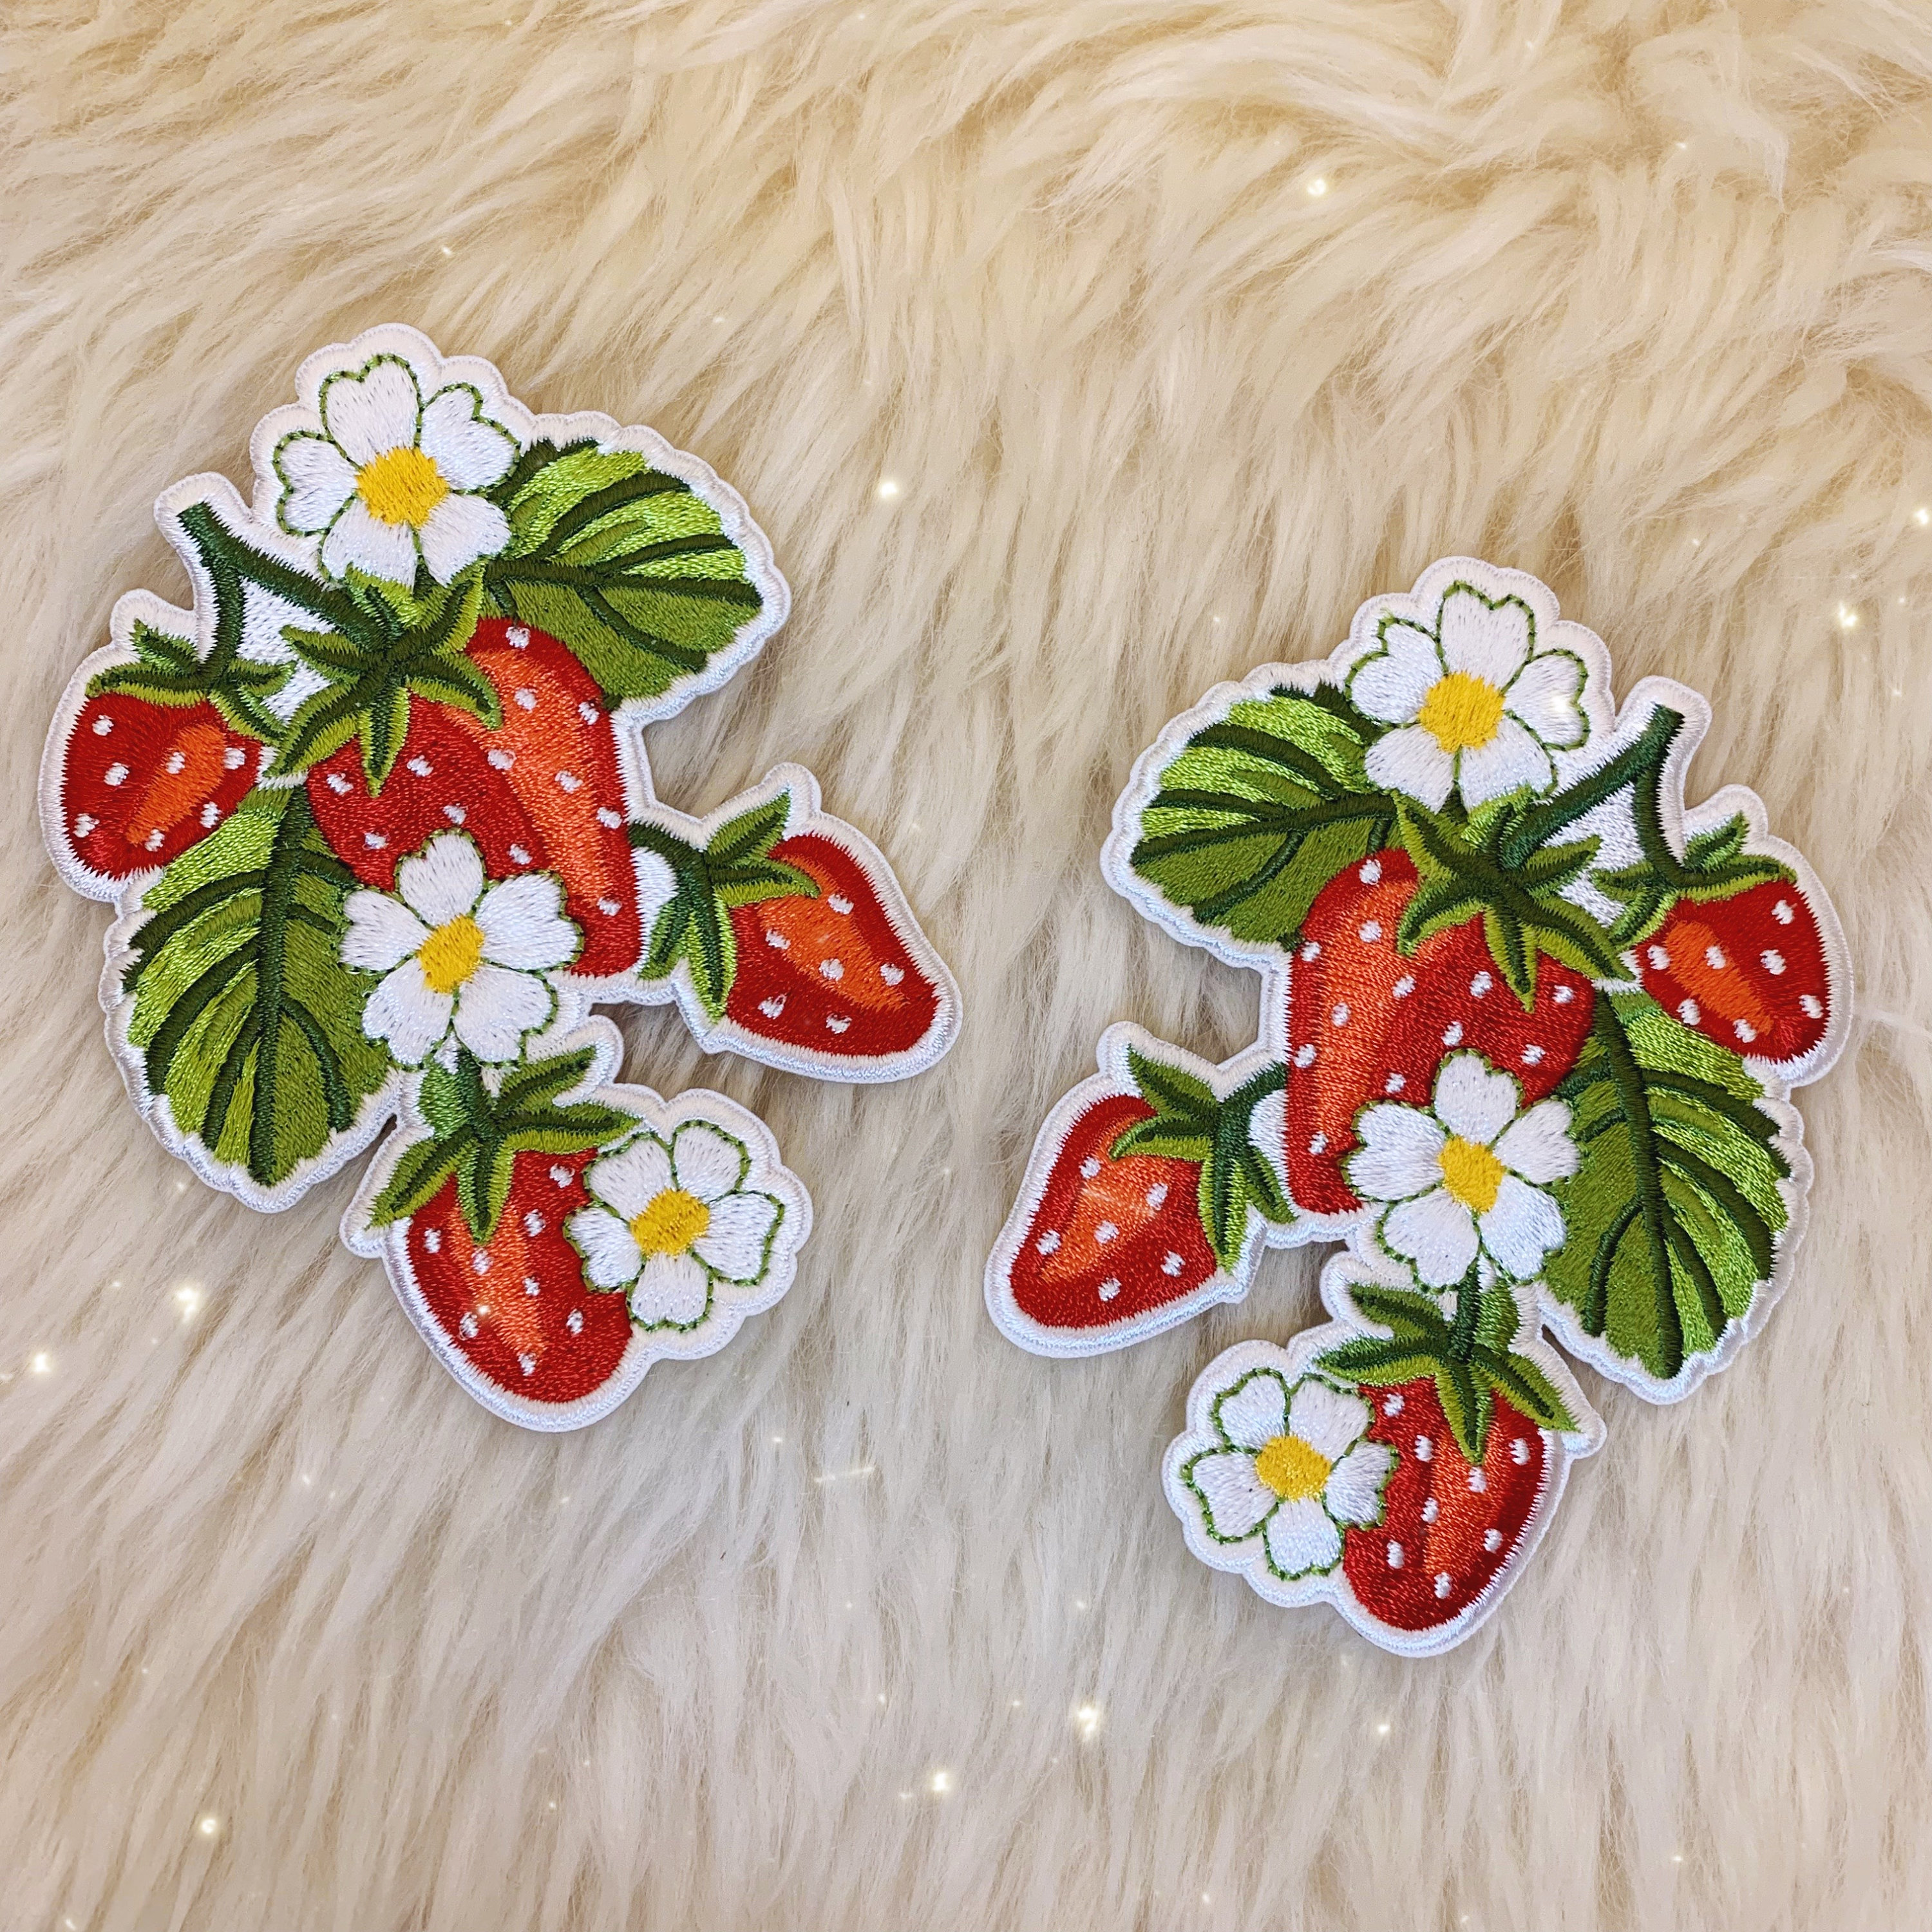 20pcs Iron on Patches Strawberry Patches for Clothing Embroidered Patches Clothing Accessories, Size: 2.7x2.3cm